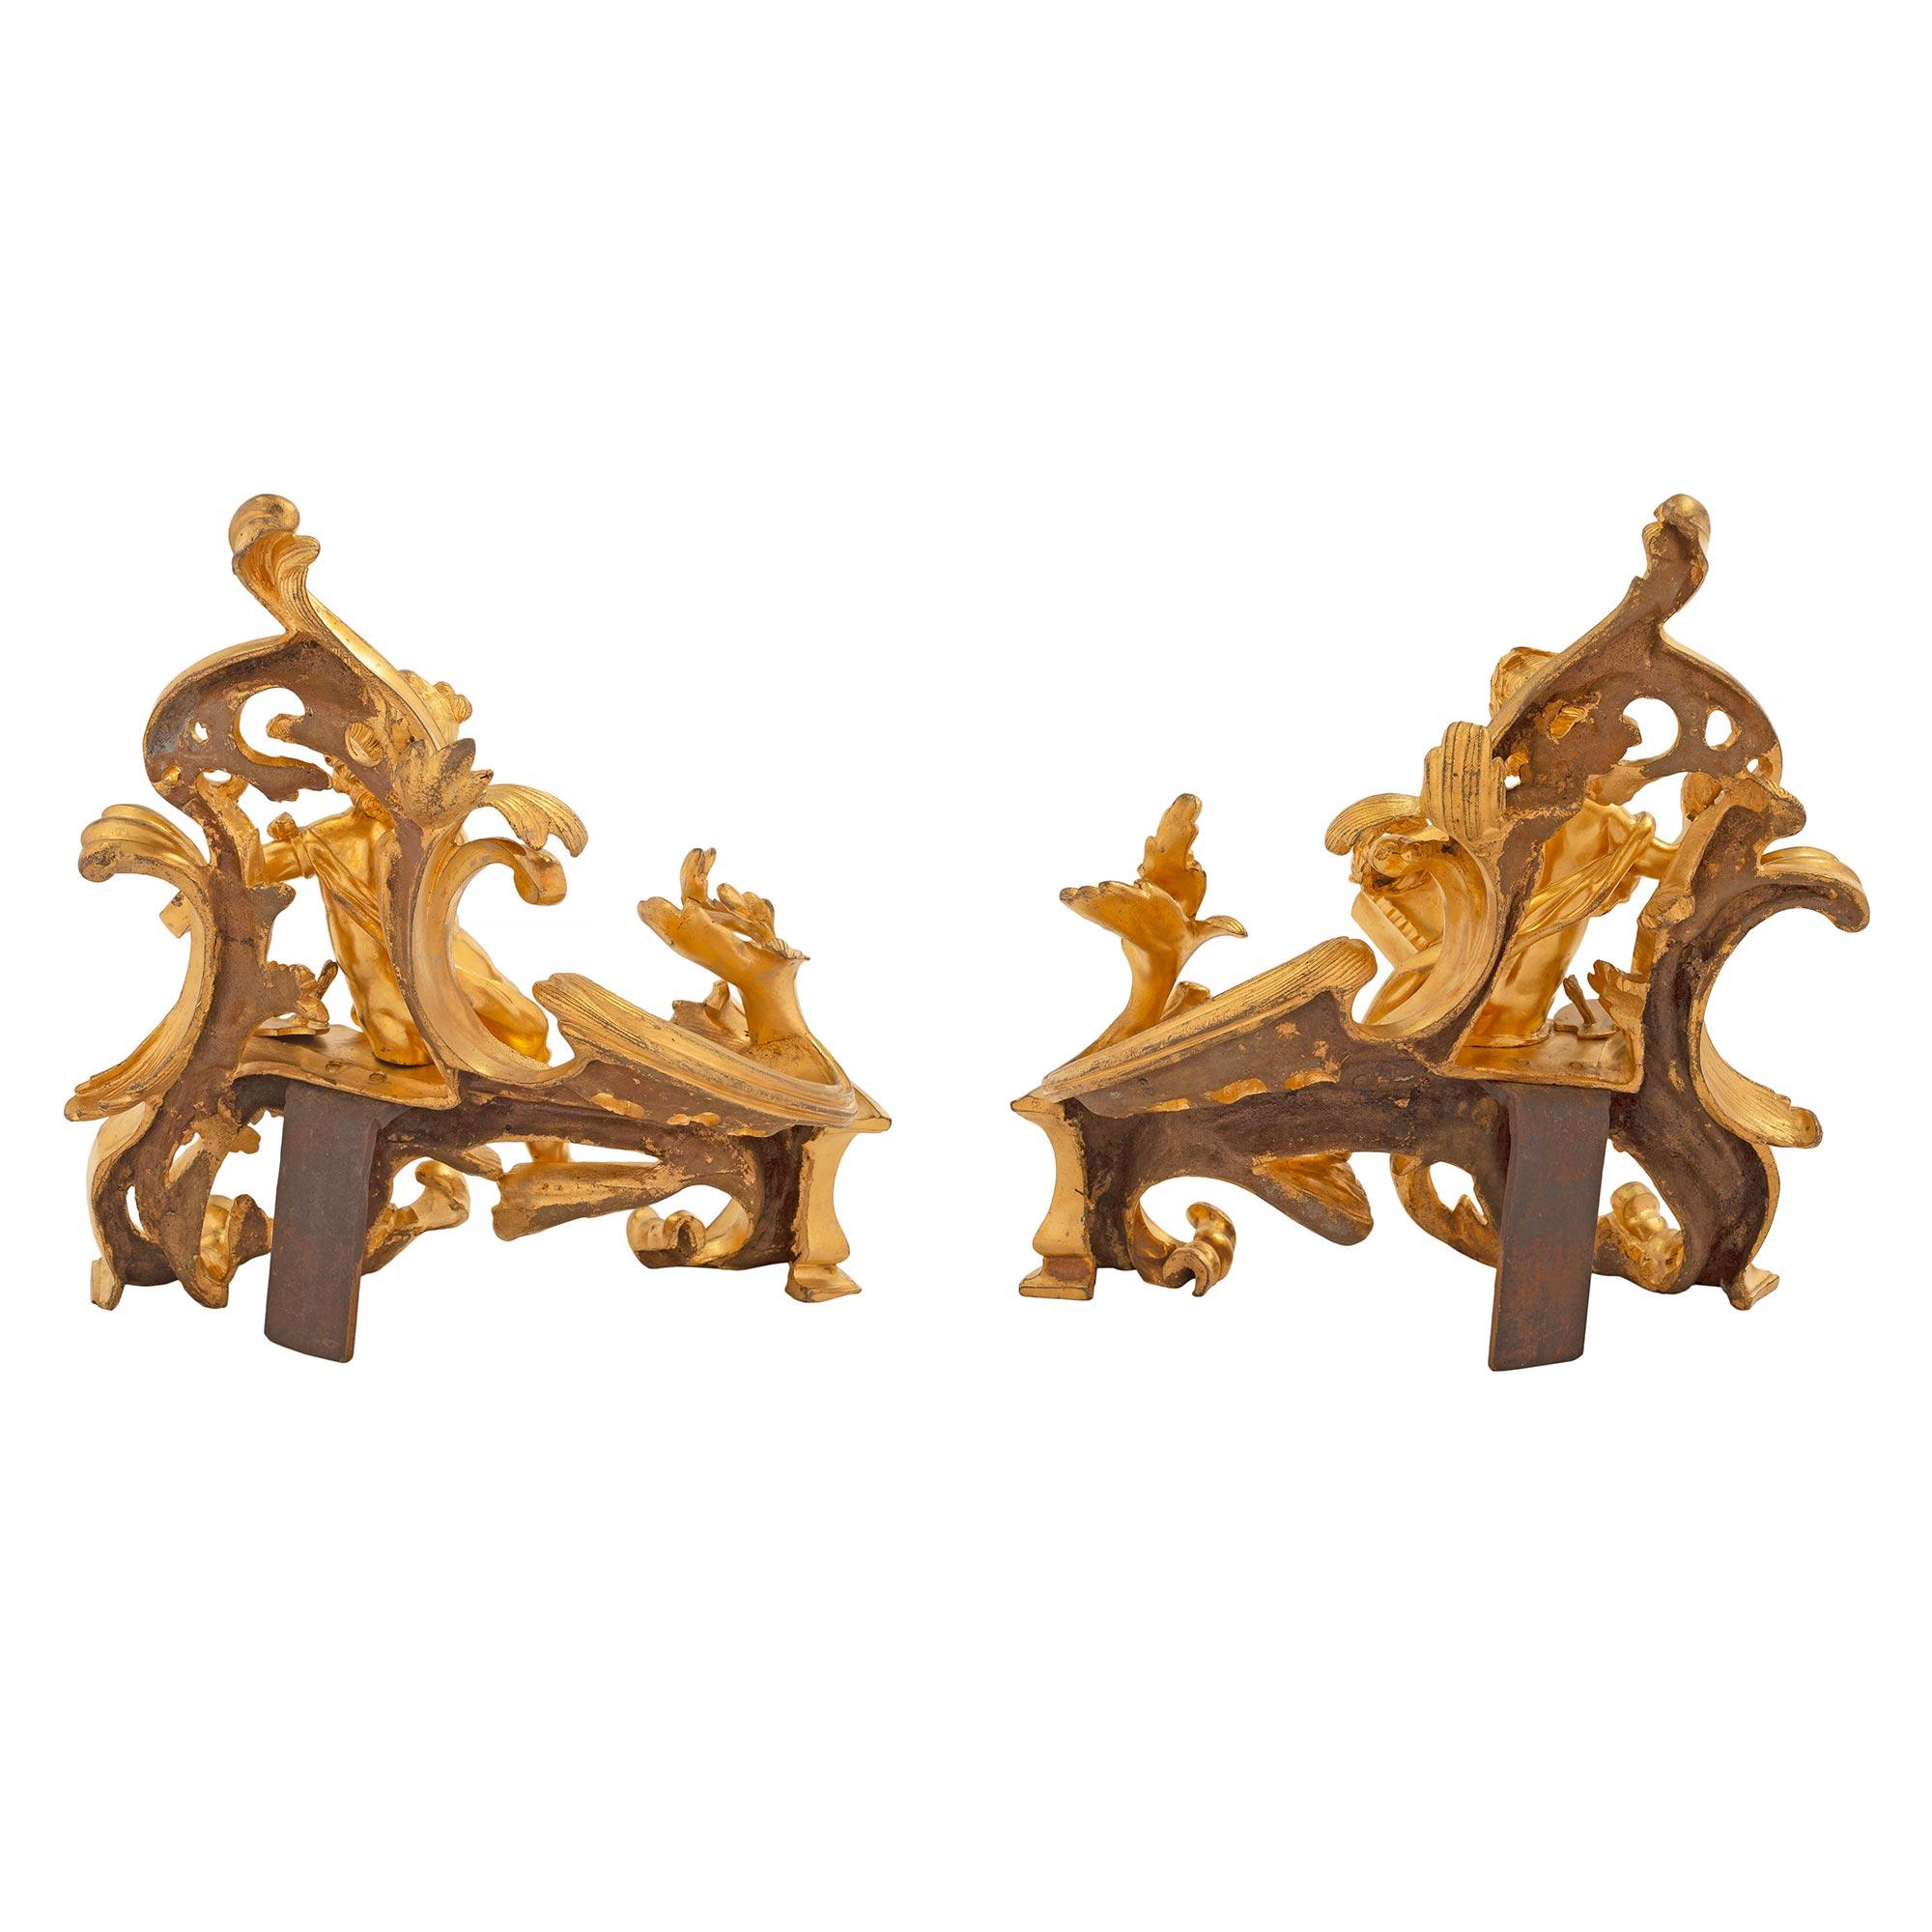 Pair of French Early 19th Century Louis XV Style Ormolu Andirons For Sale 5